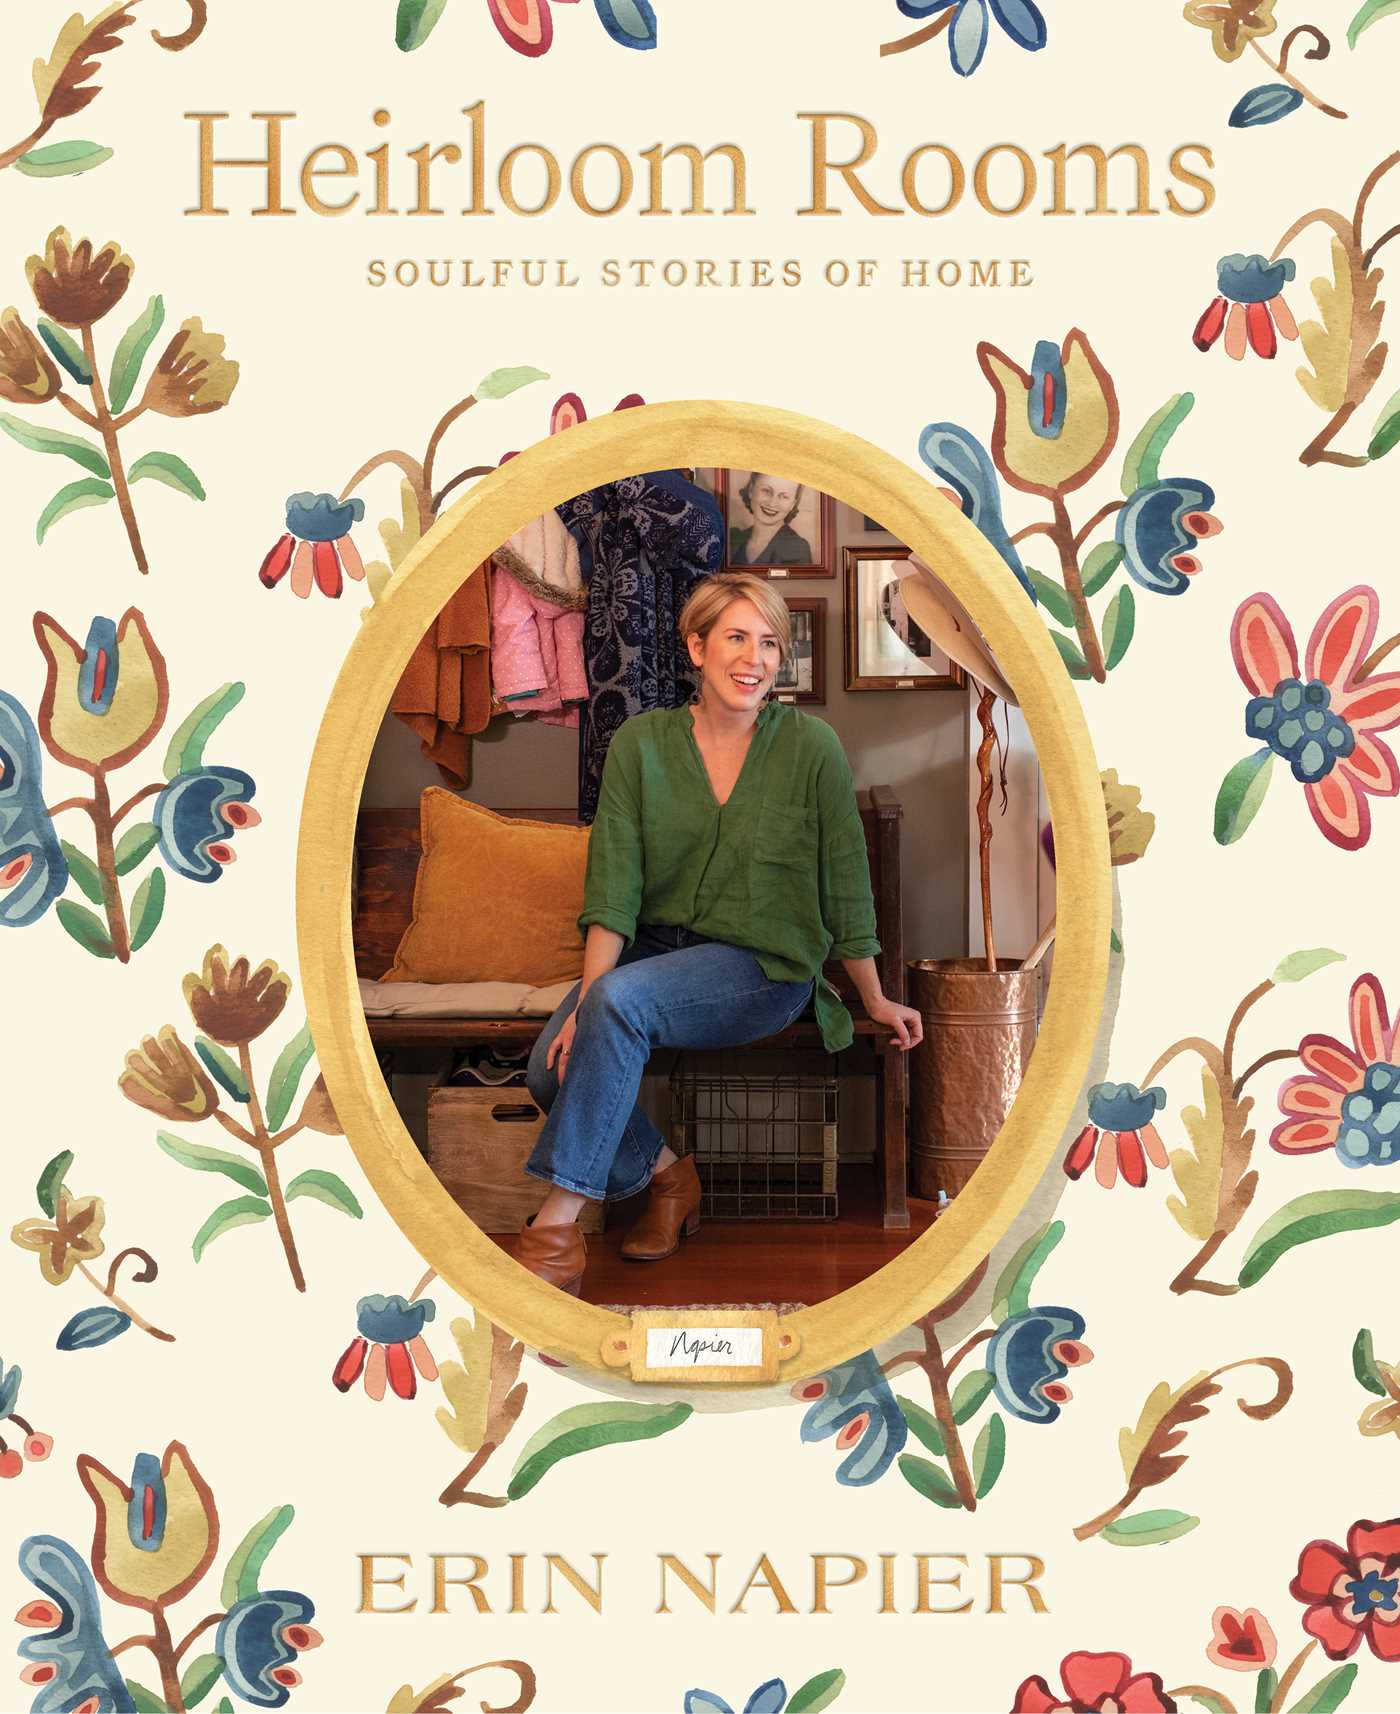 Image for "Heirloom Rooms"